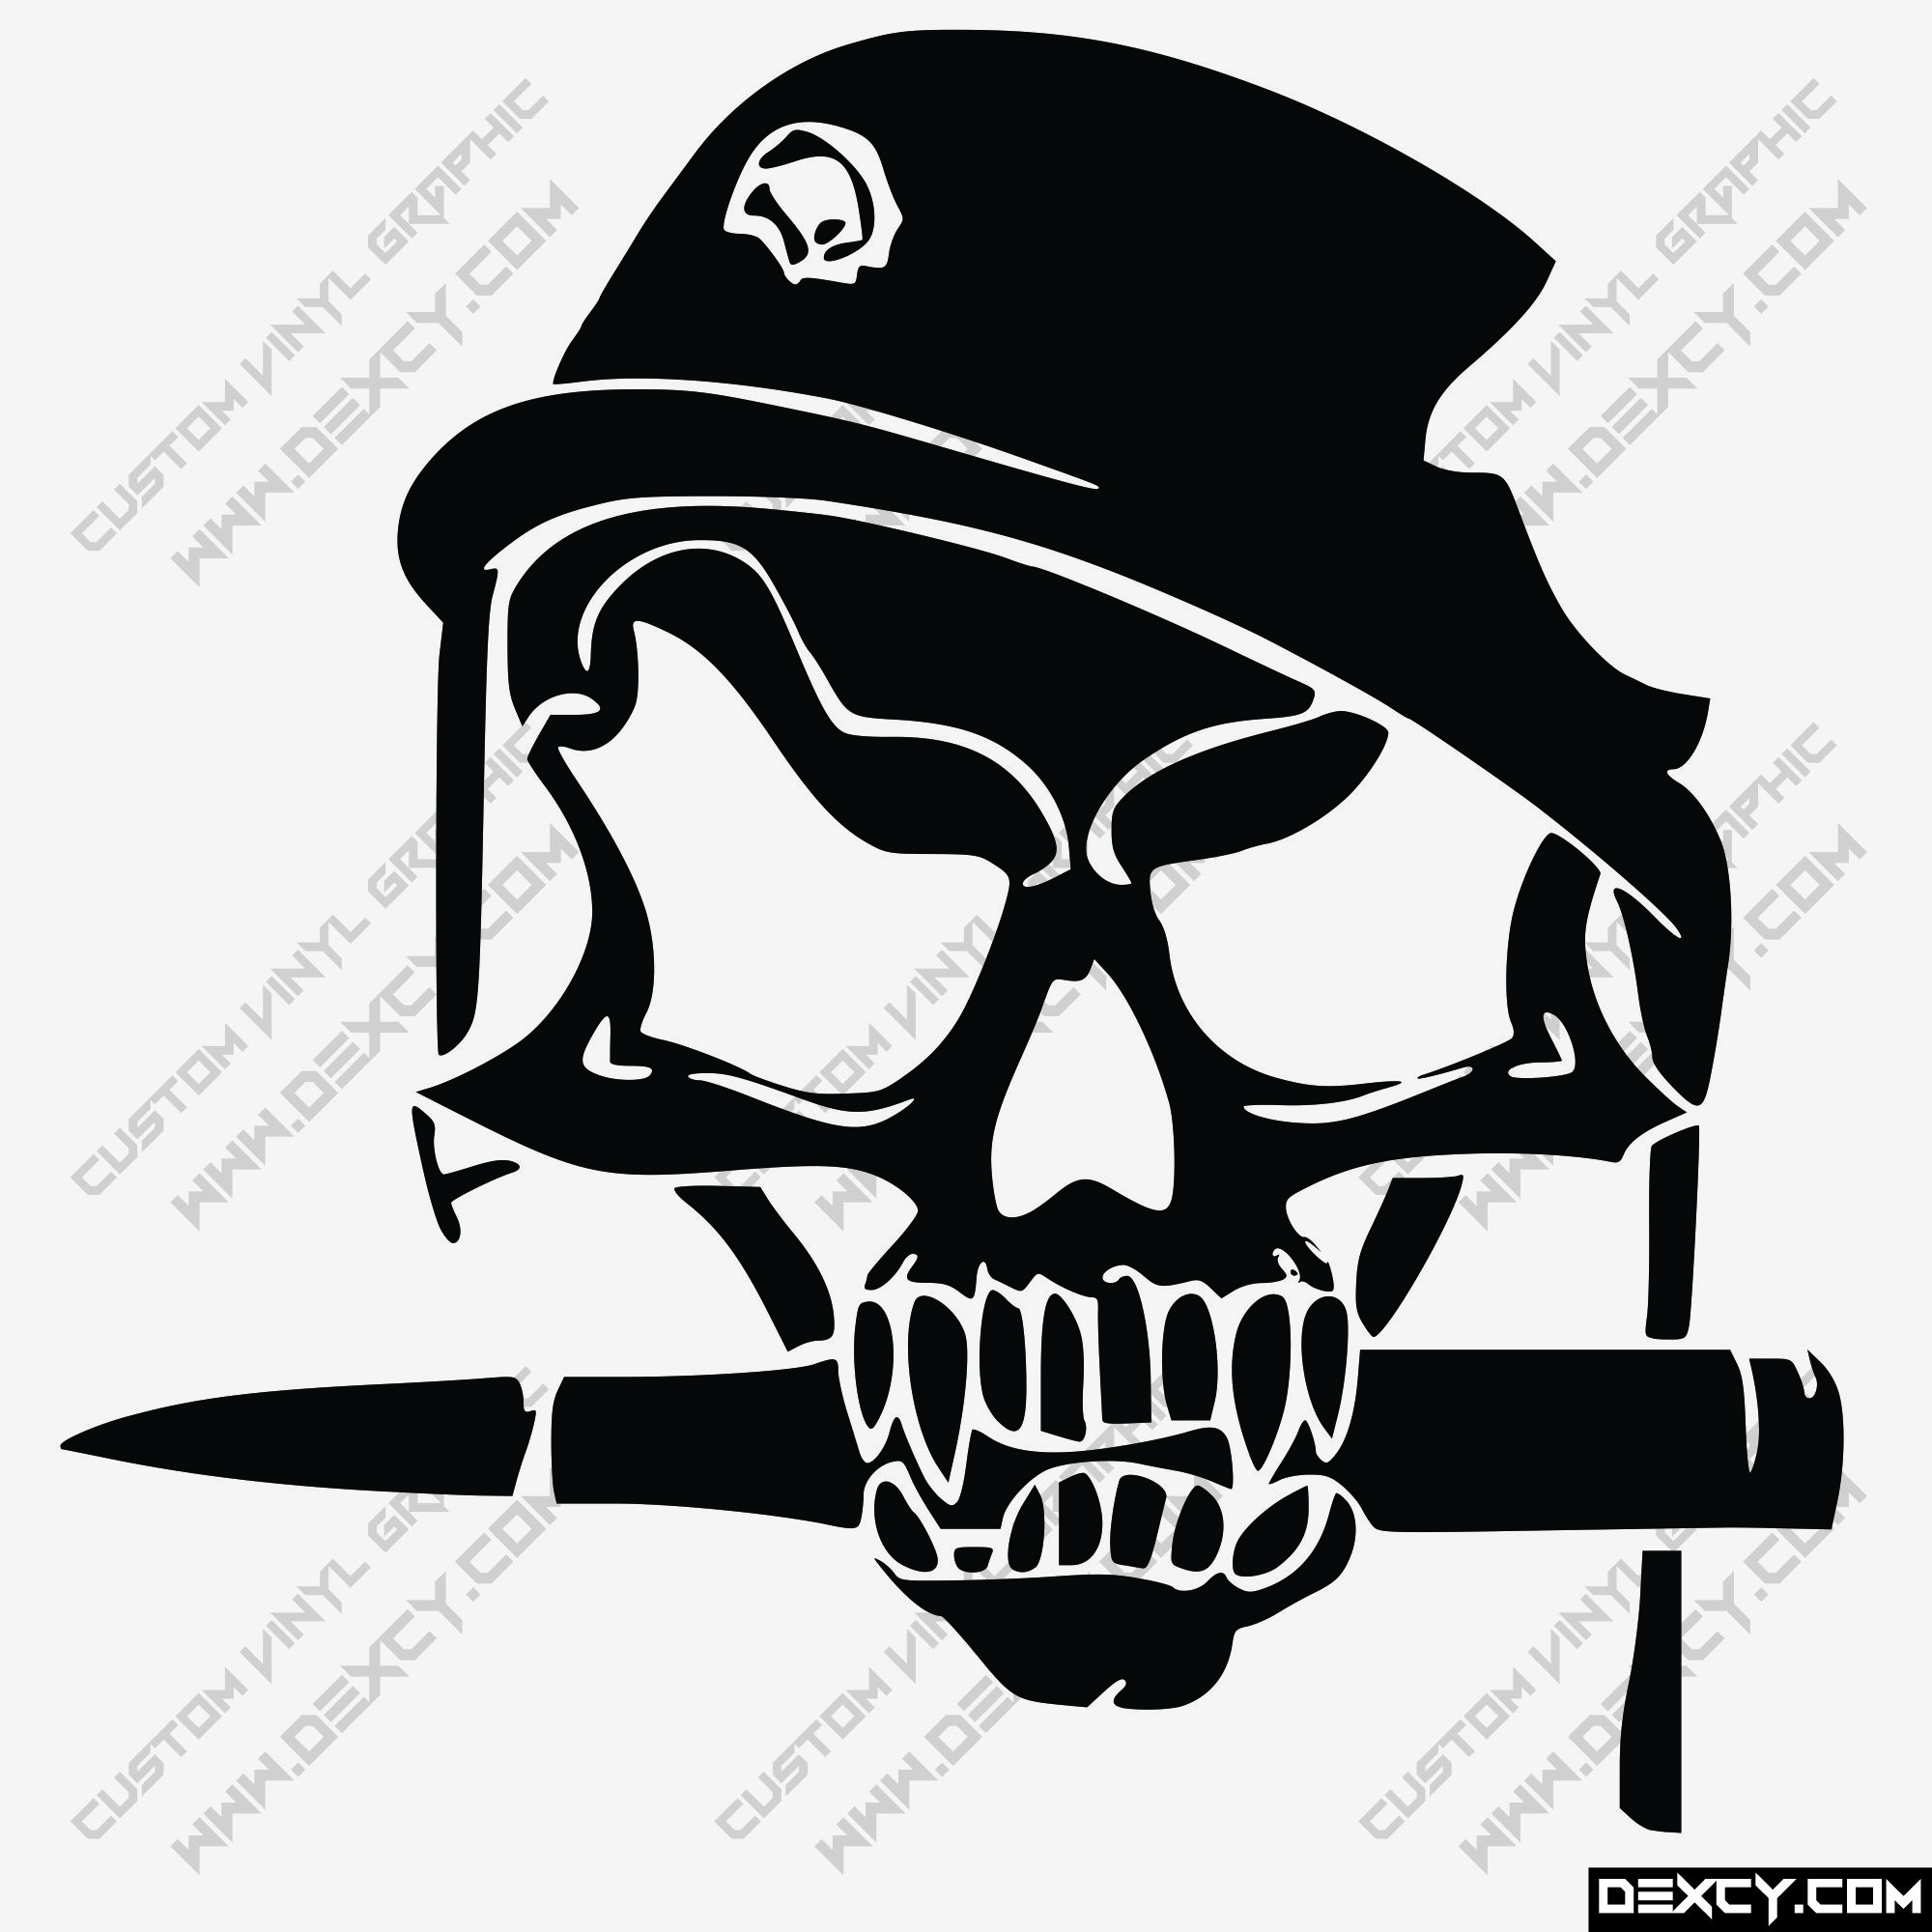 Military Skull Decal Sticker Custom Vinyl Decal Stickers Outdoor Car Truck Boat Sign Business